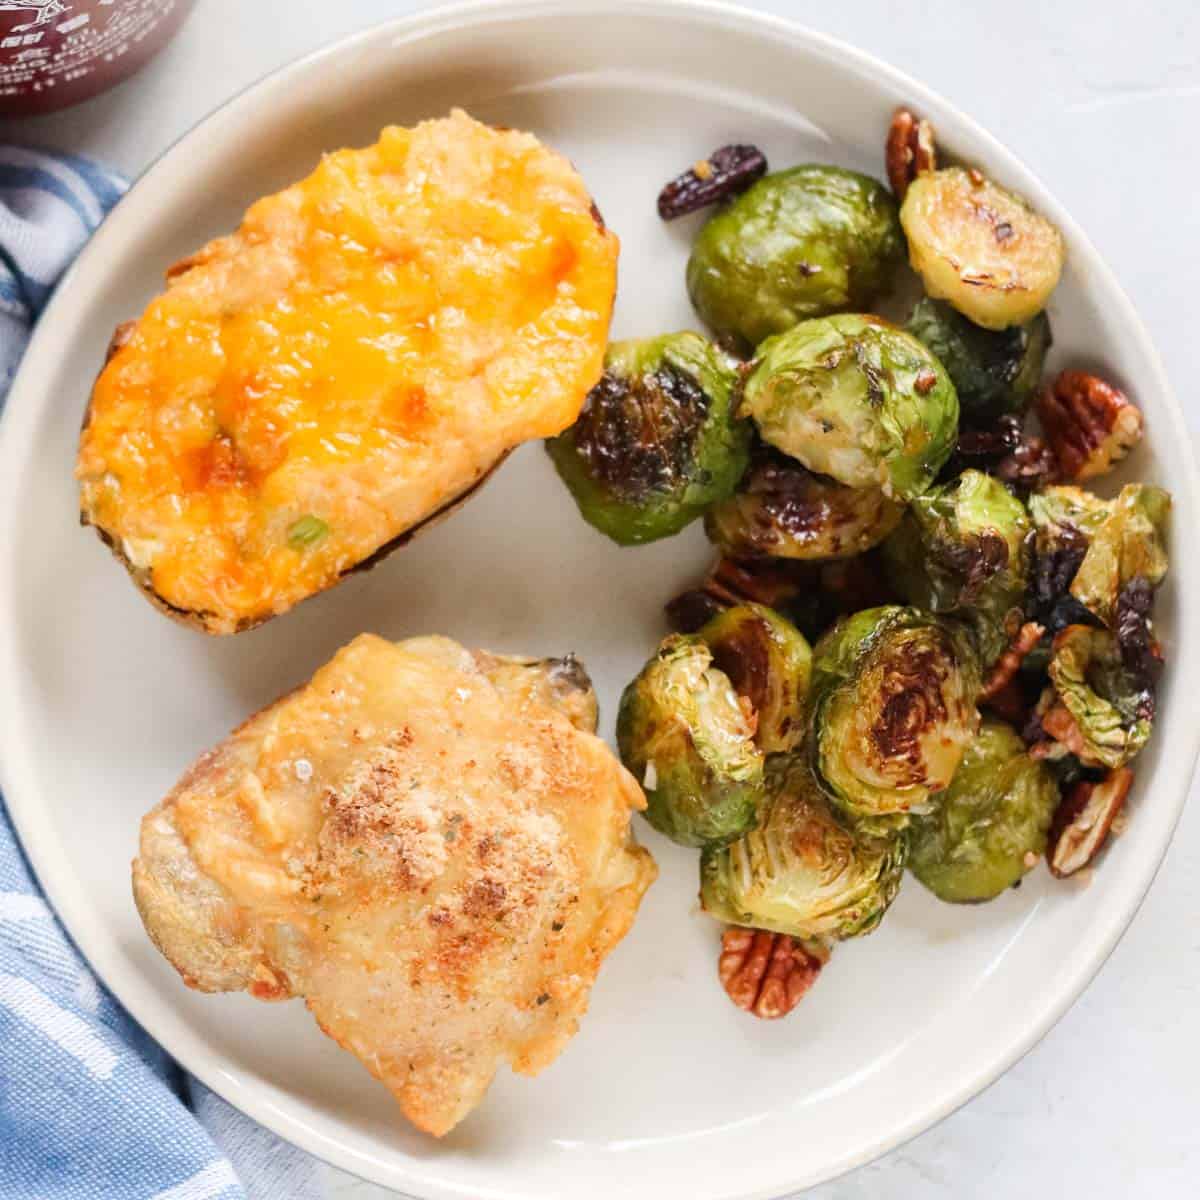 plate with twice baked potato, roasted Brussels sprouts, and a chicken thigh